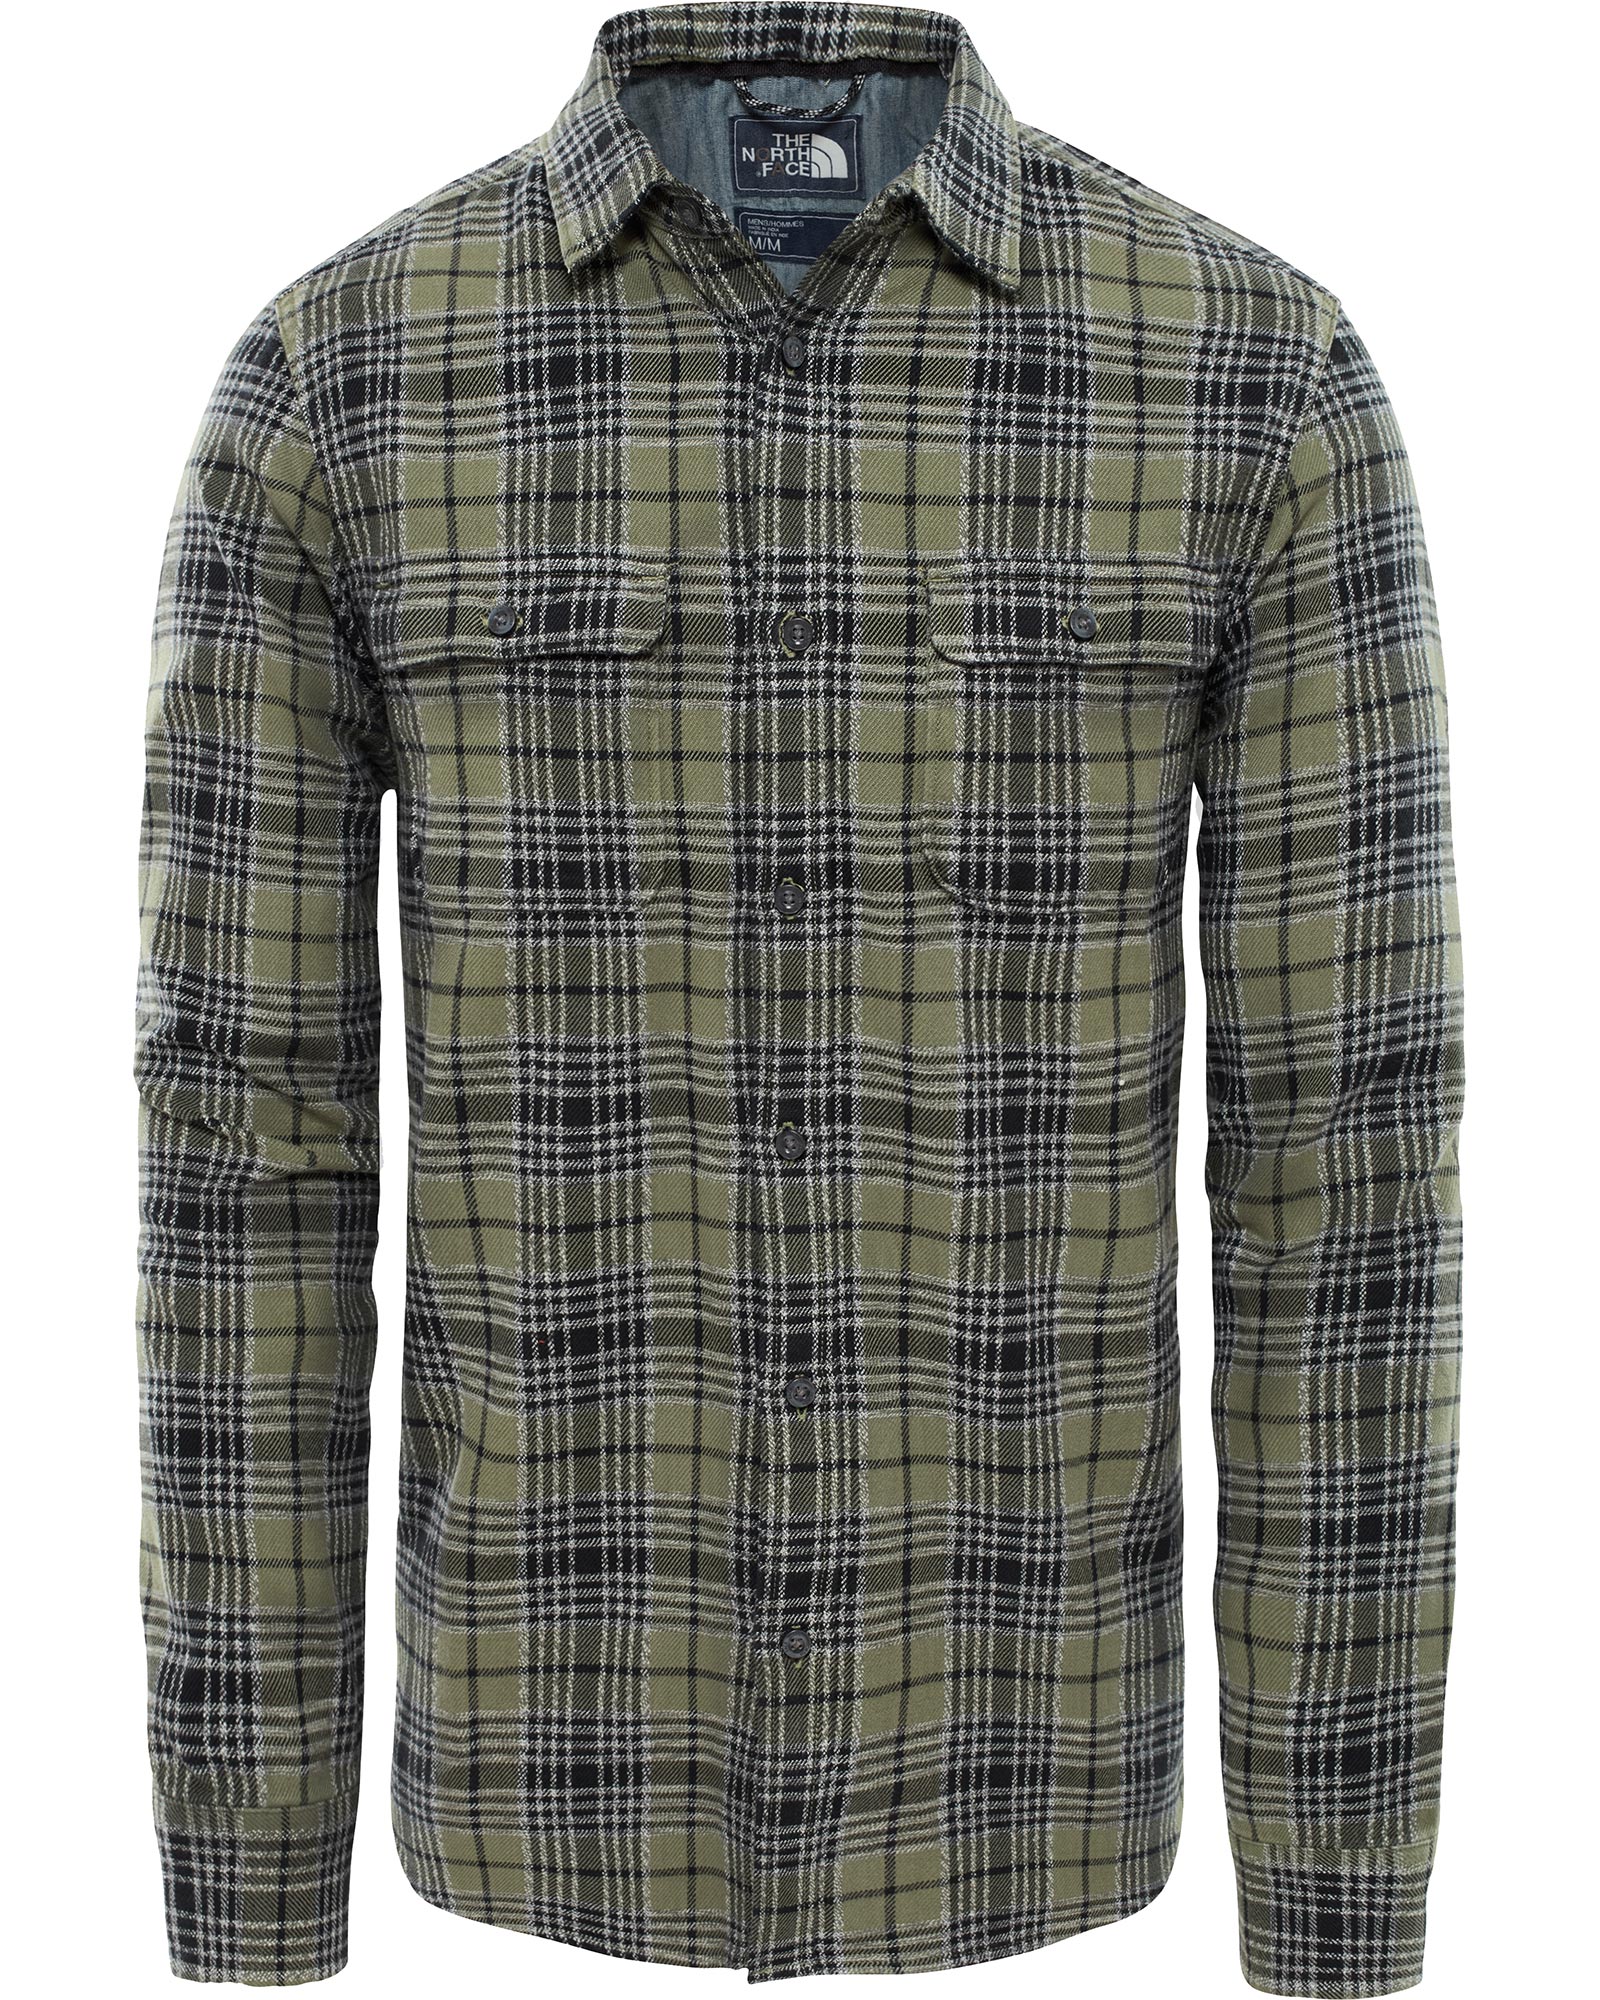 The North Face Arroyo Flannel Men’s Long Sleeve Shirt - Four Leaf Clover S